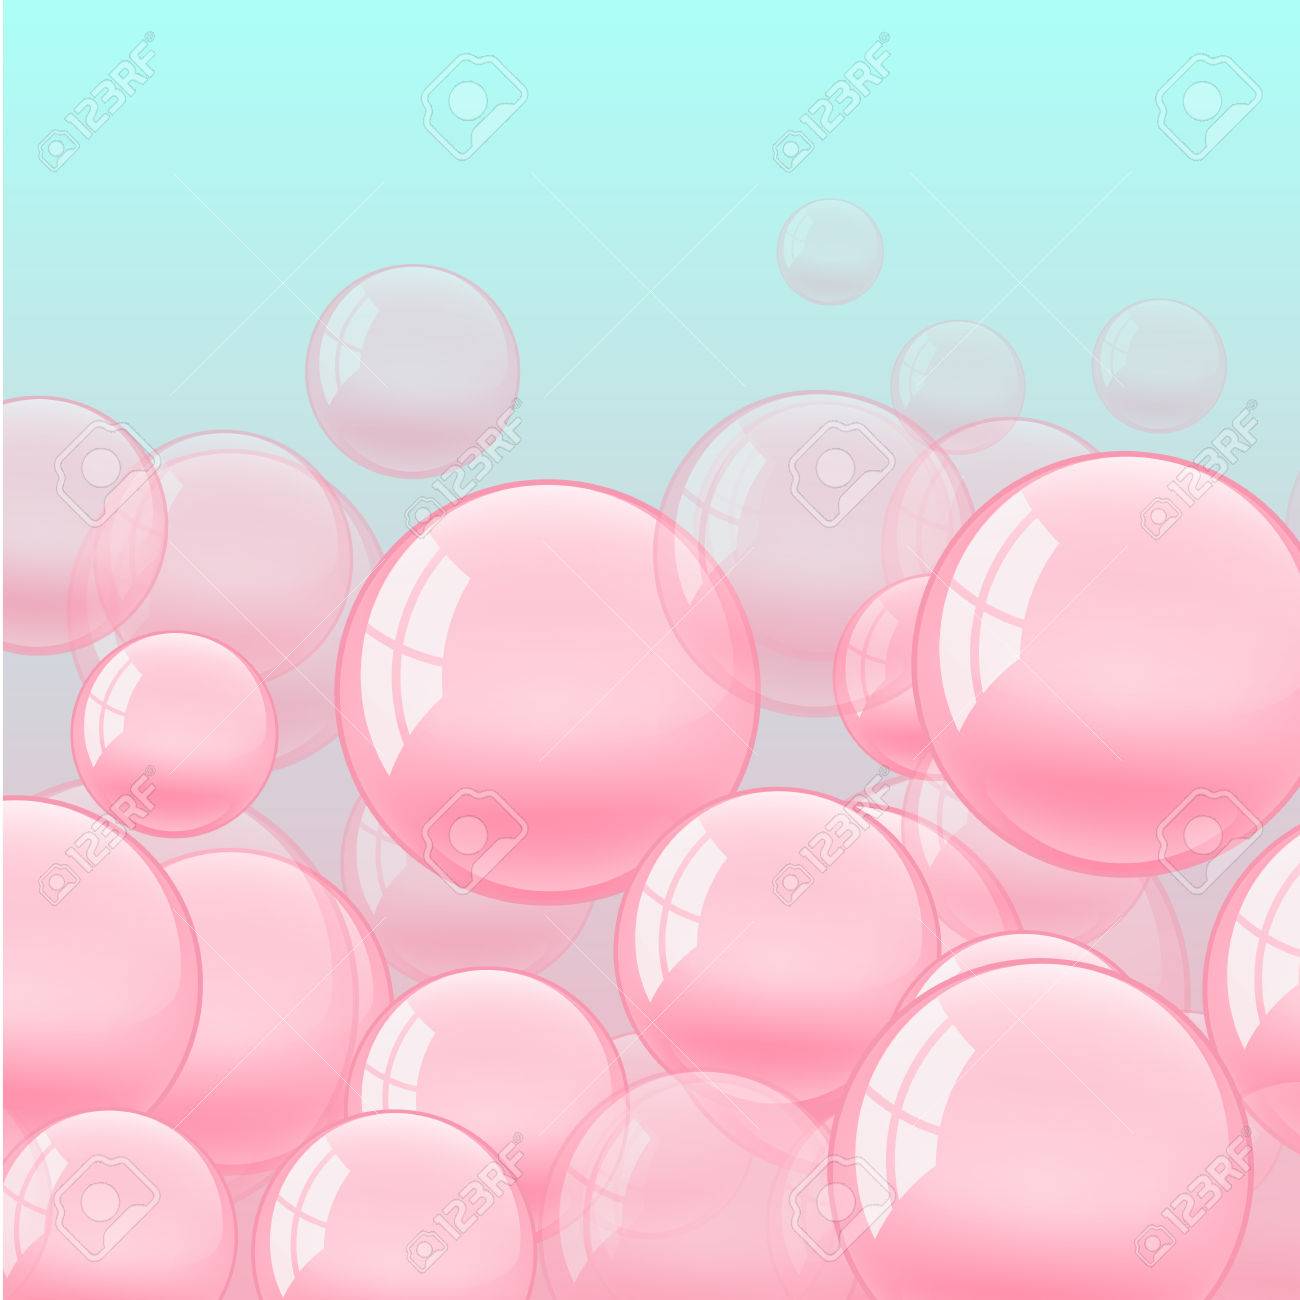 Background With Bubble Gum Flat Bright Illustration Royalty